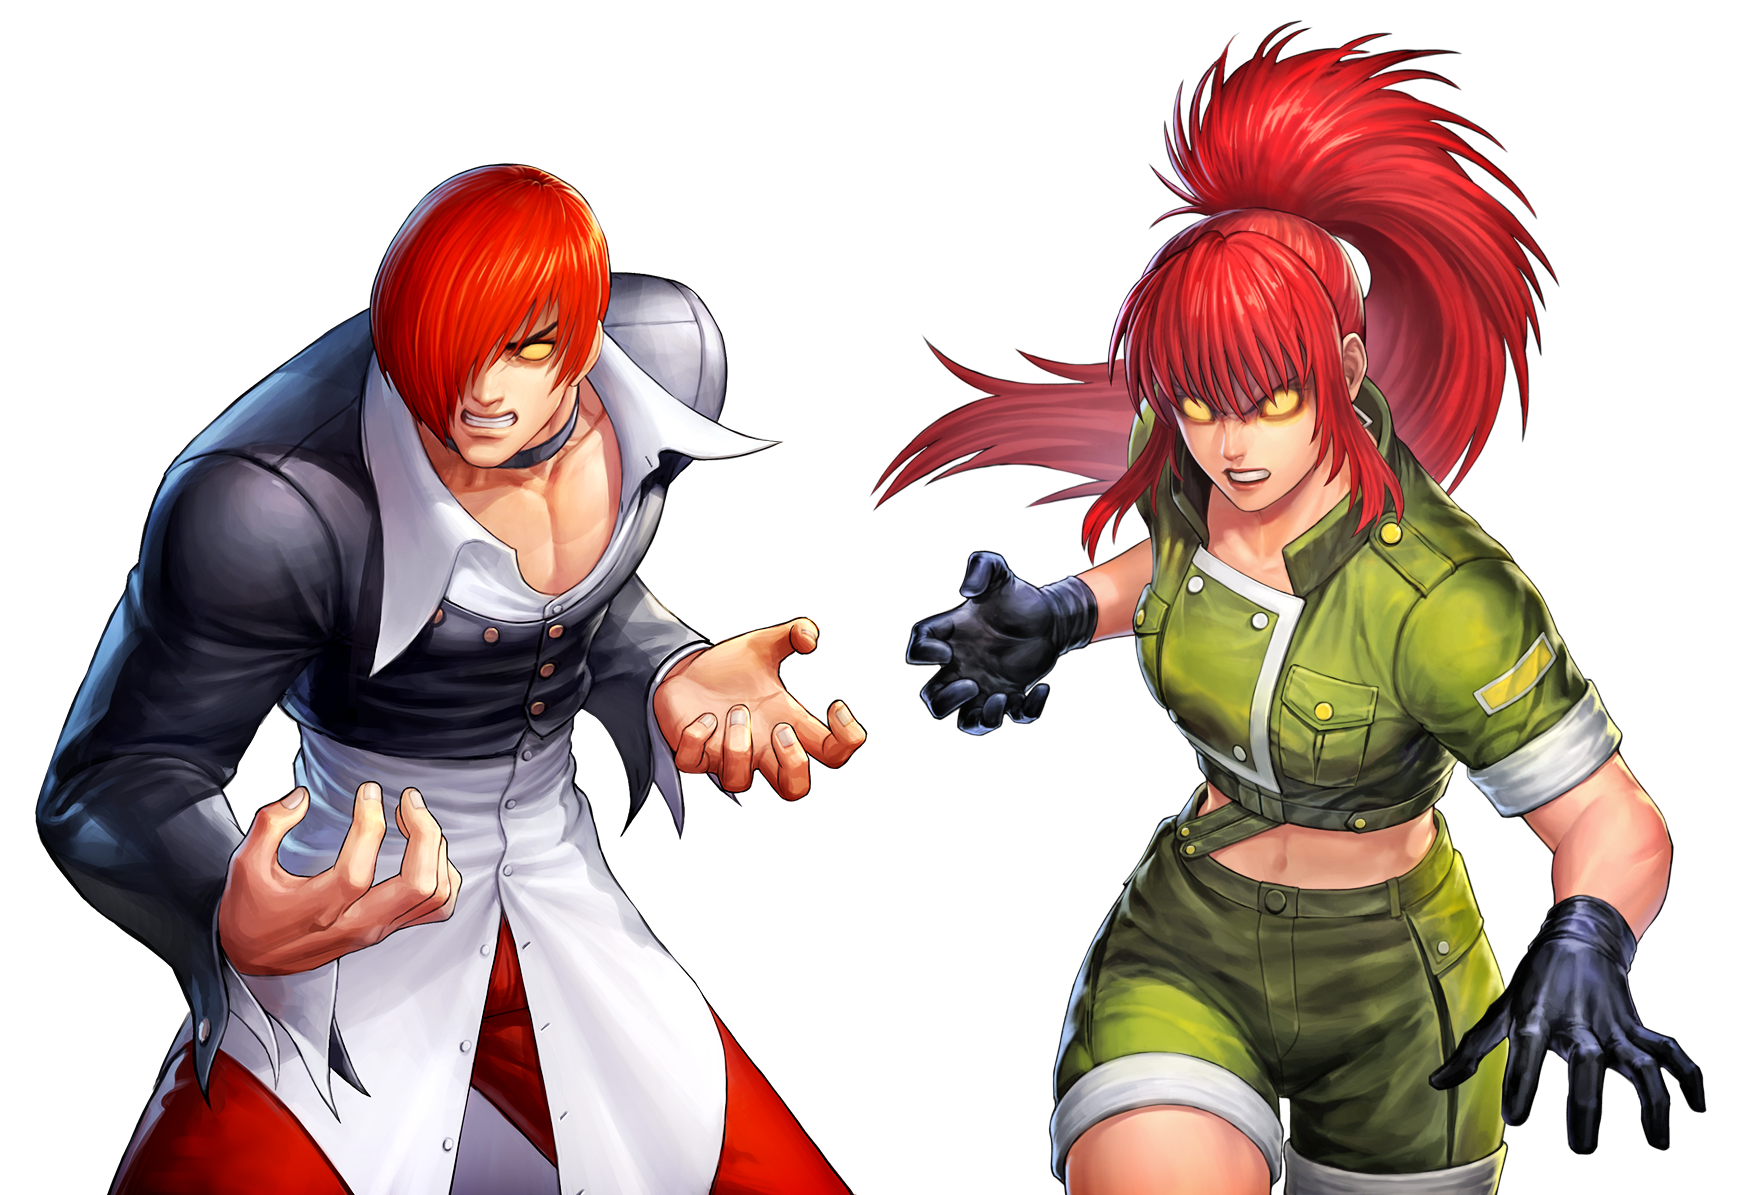 The King Of Fighters 2002: Unlimited Match Iori Yagami Leona Heidern Orochi  PNG - anime, black hair, brown hair, charac…